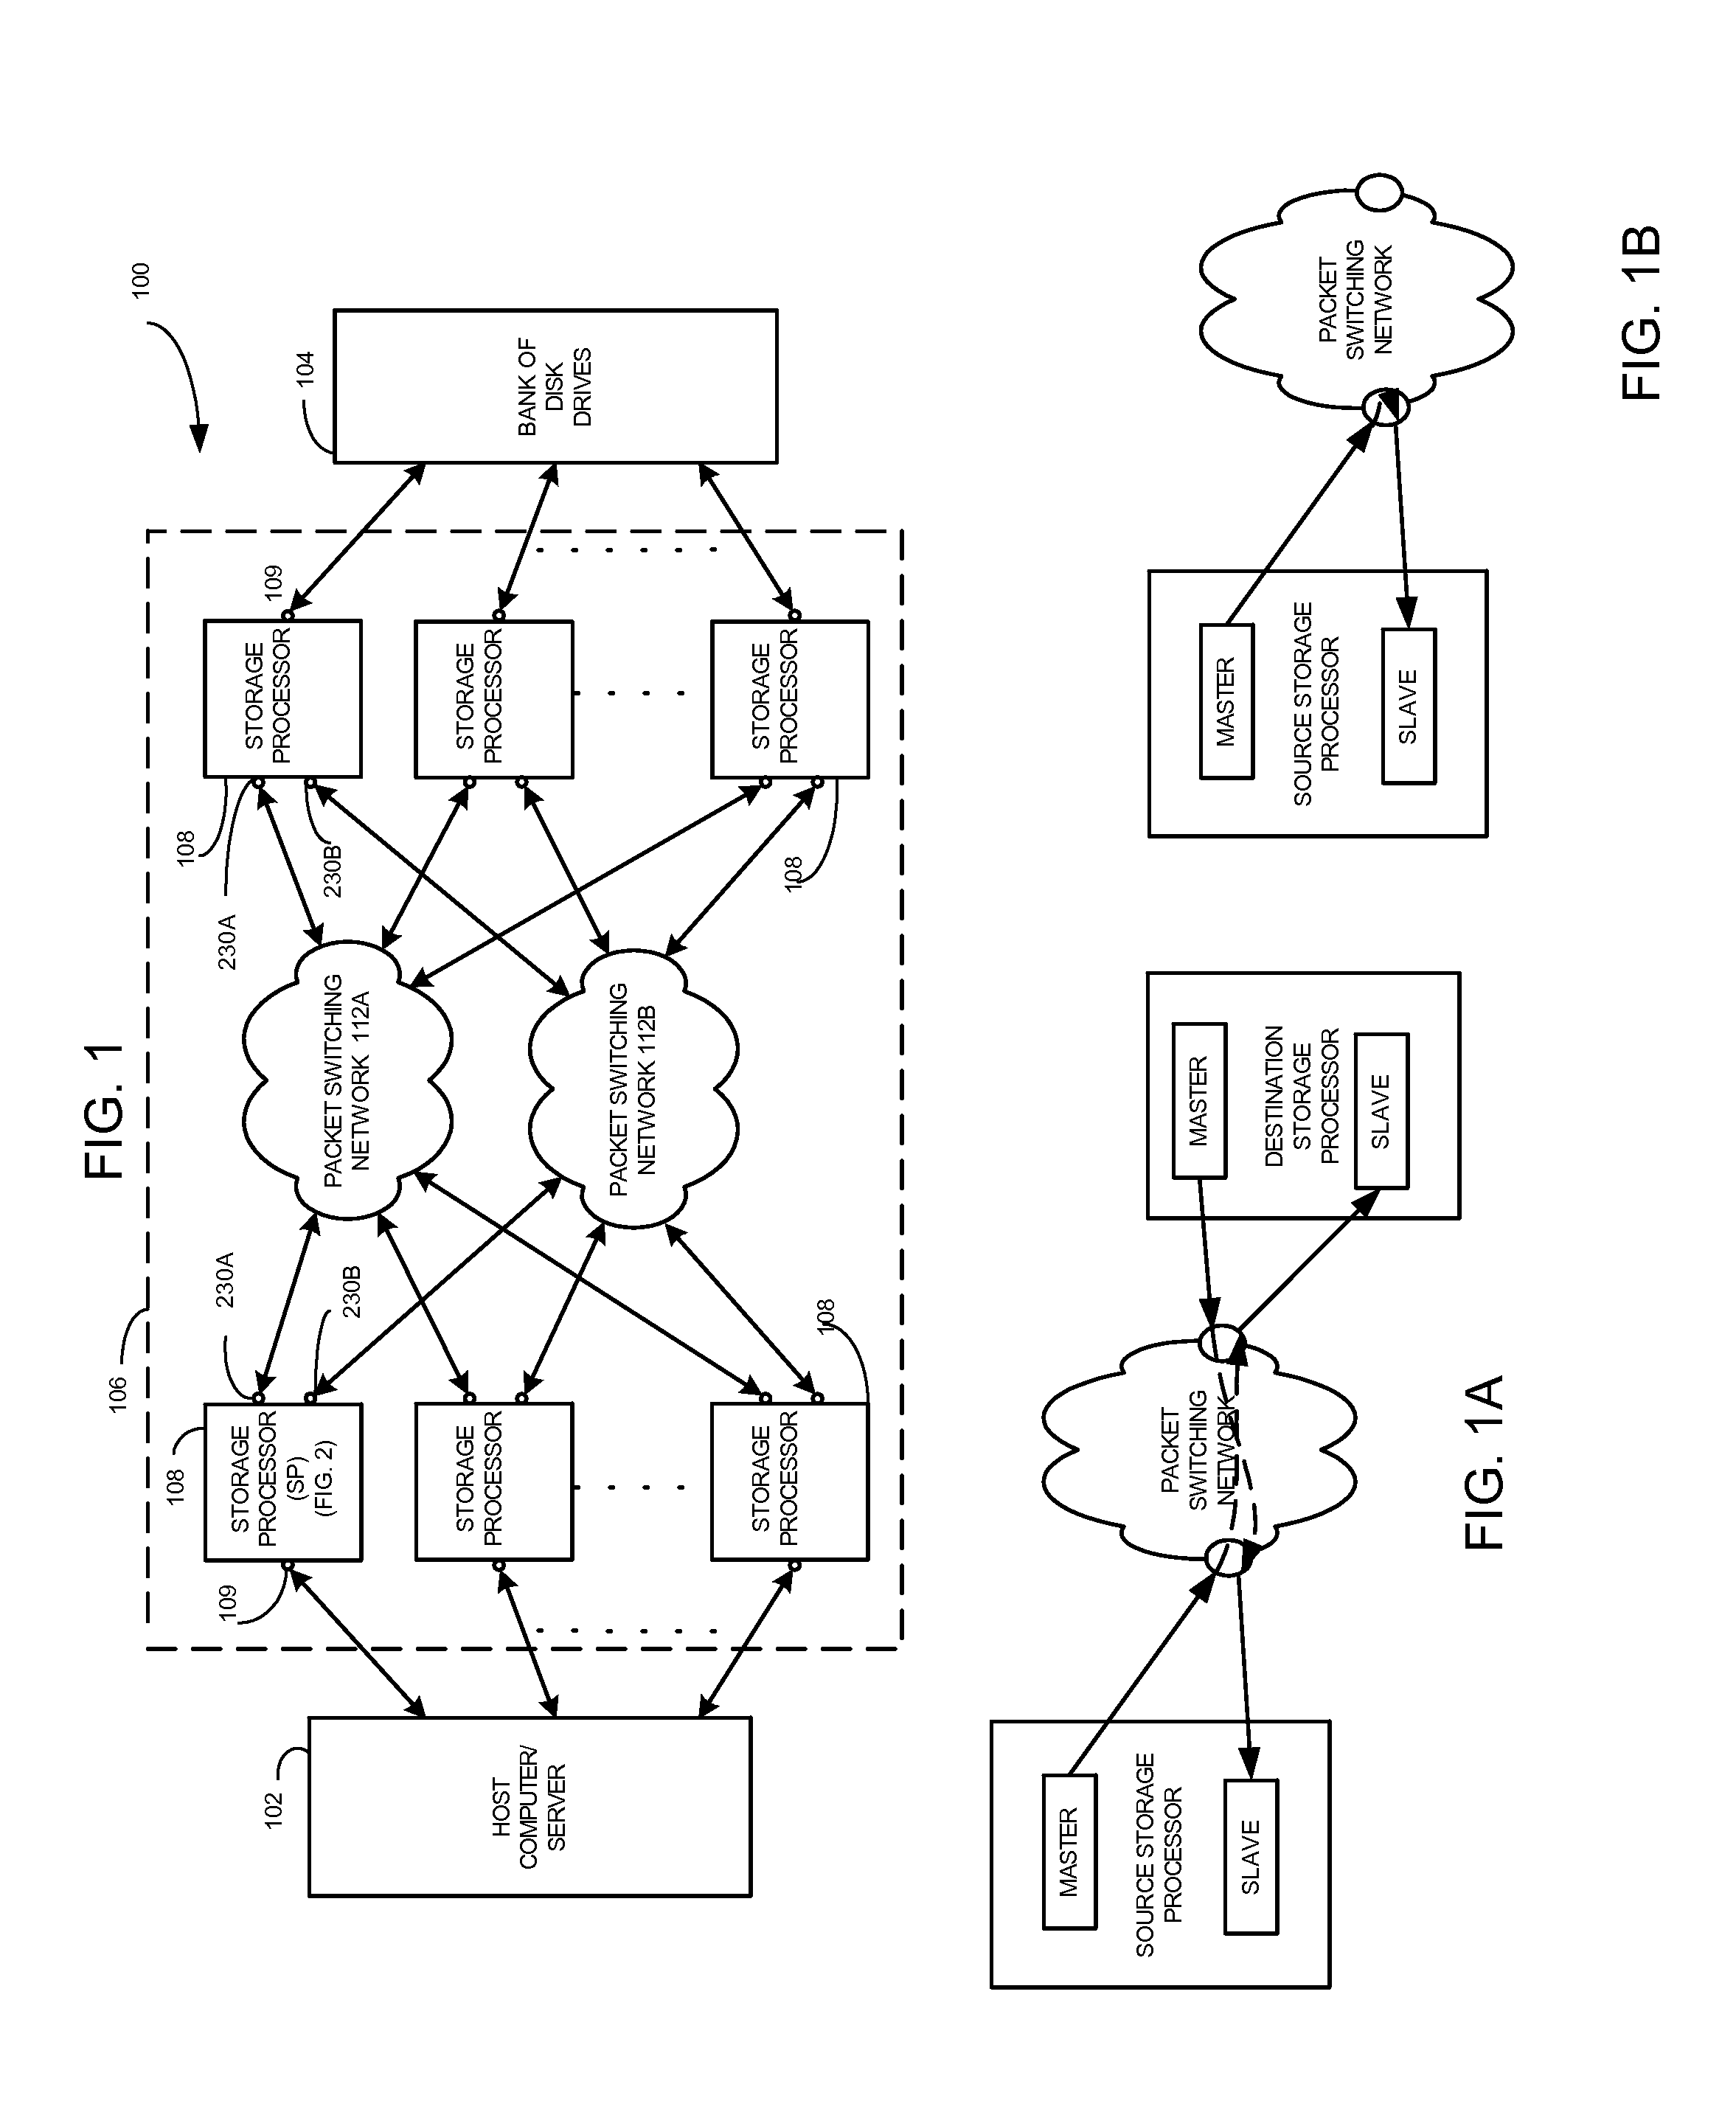 Method of operating a data storage system having plural data pipes